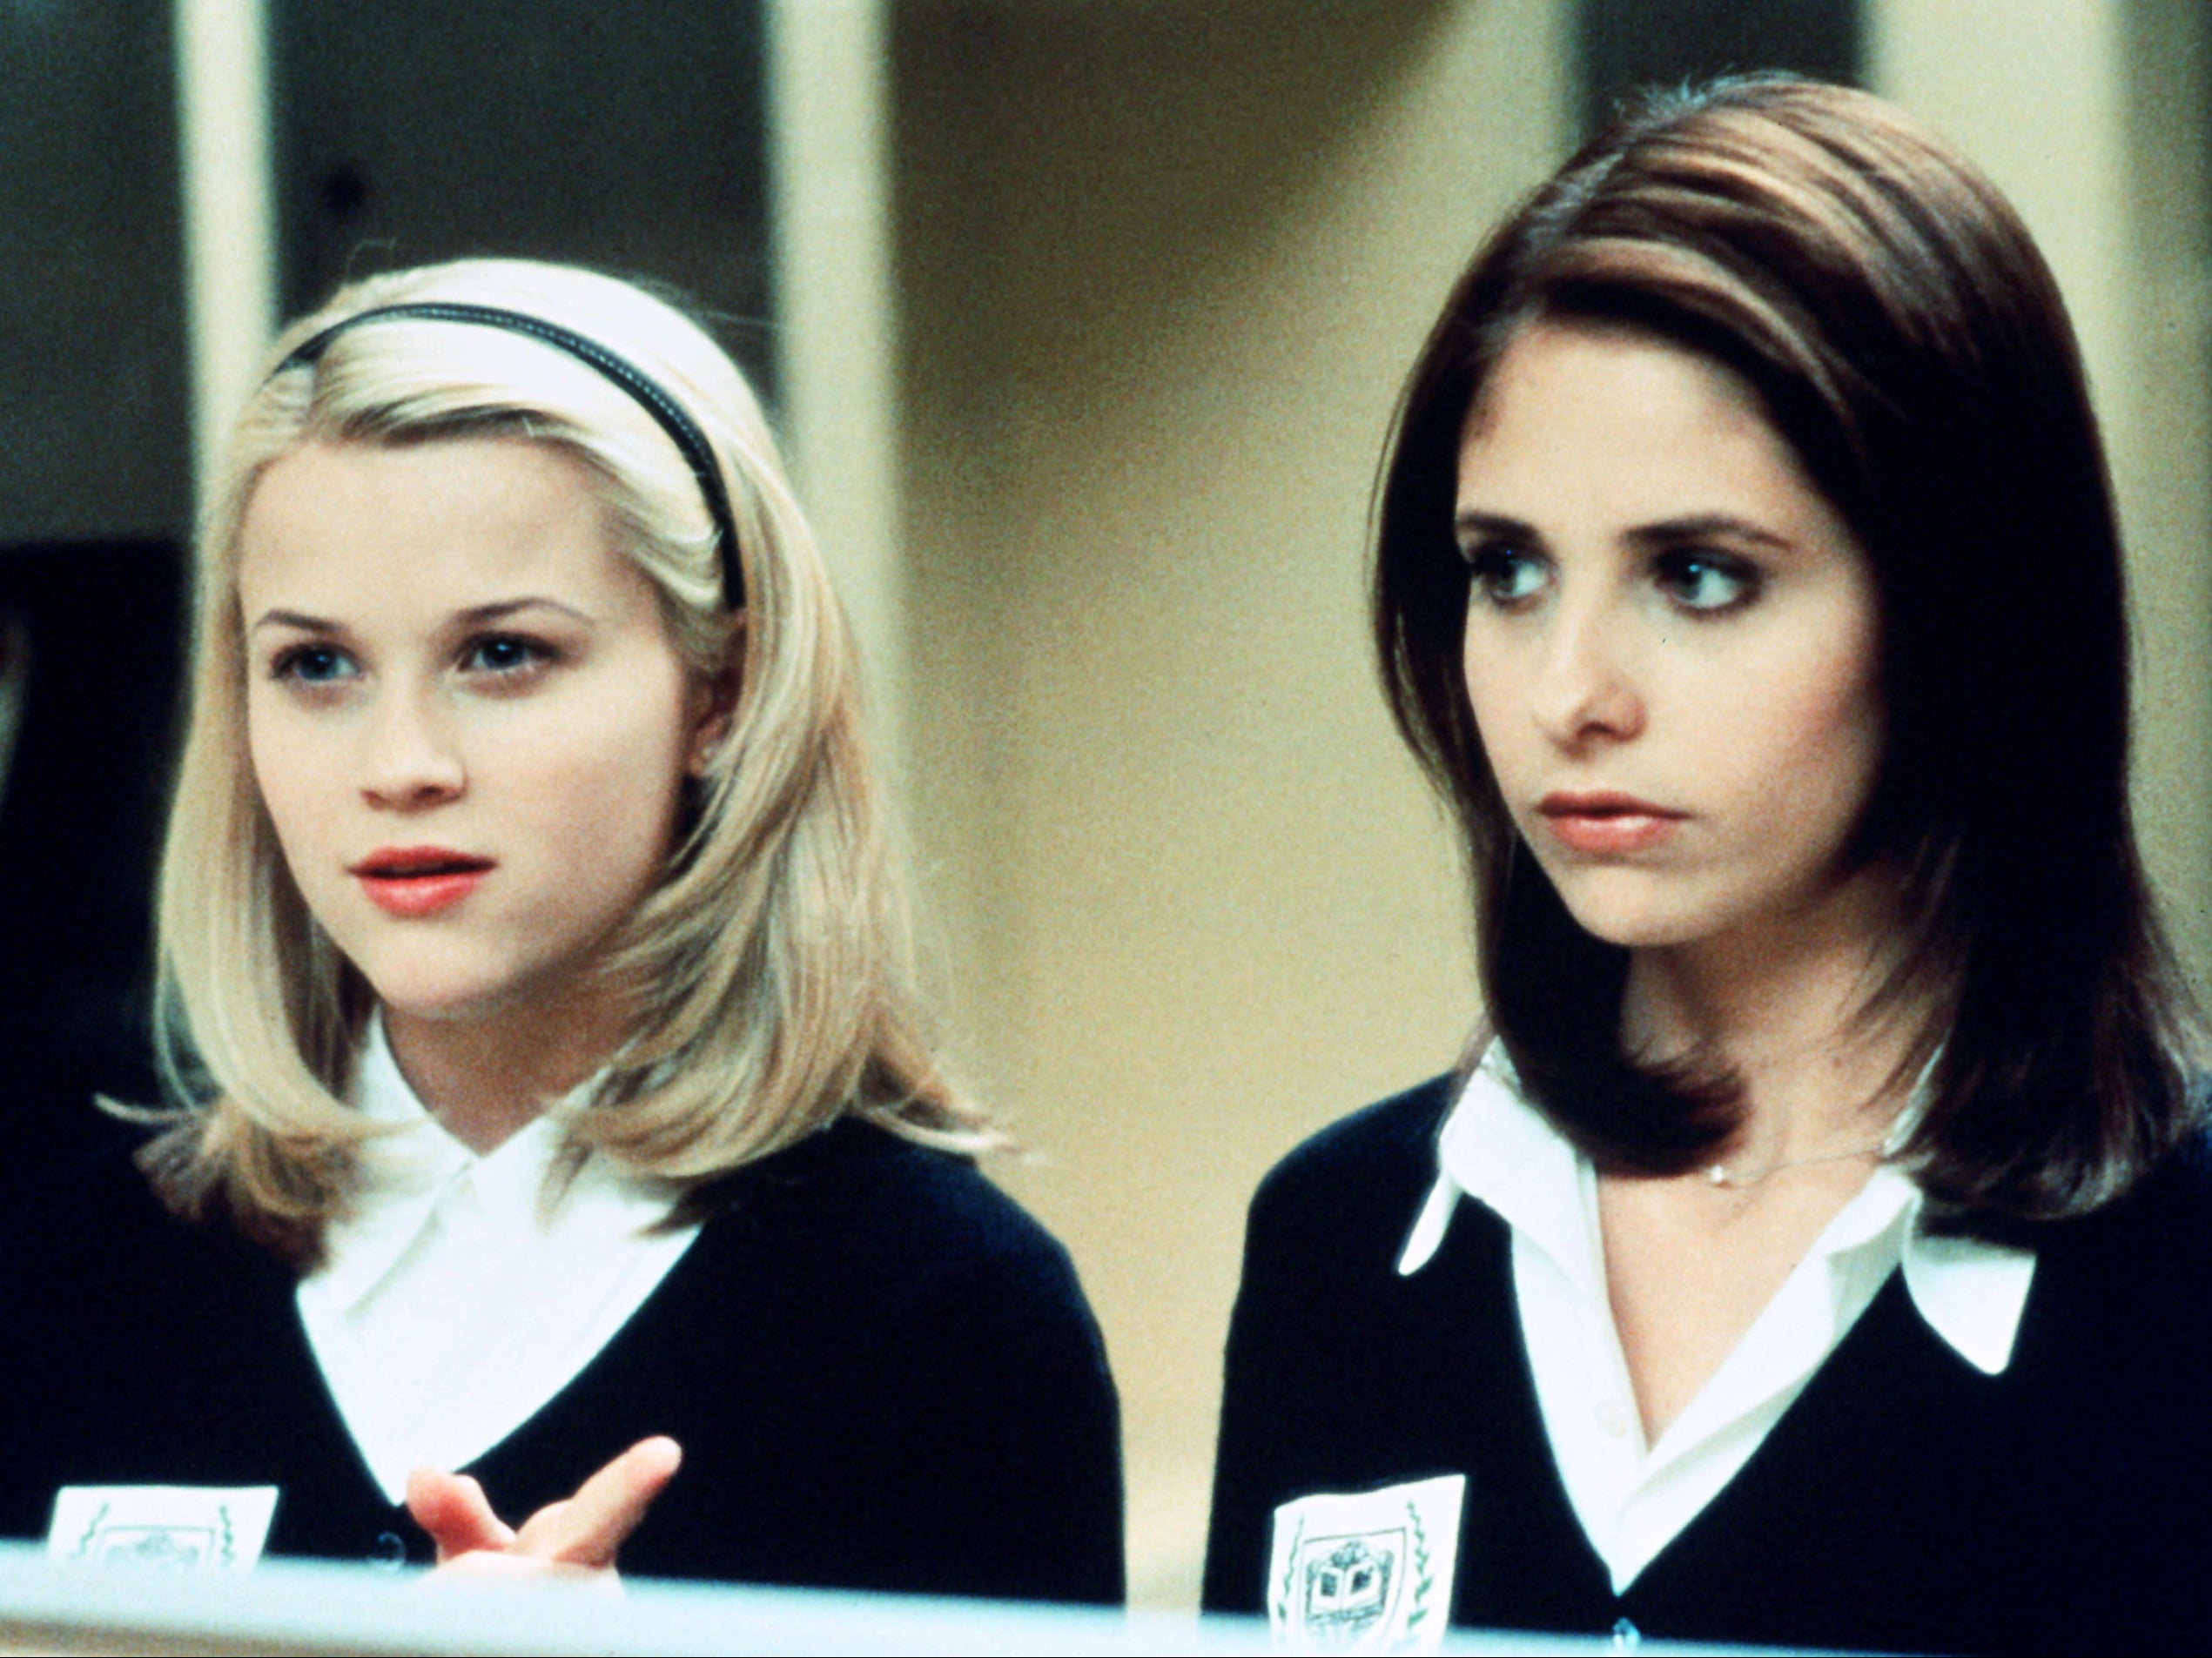 Reese Witherspoon and Sarah Michelle Gellar in ‘Cruel Intentions'